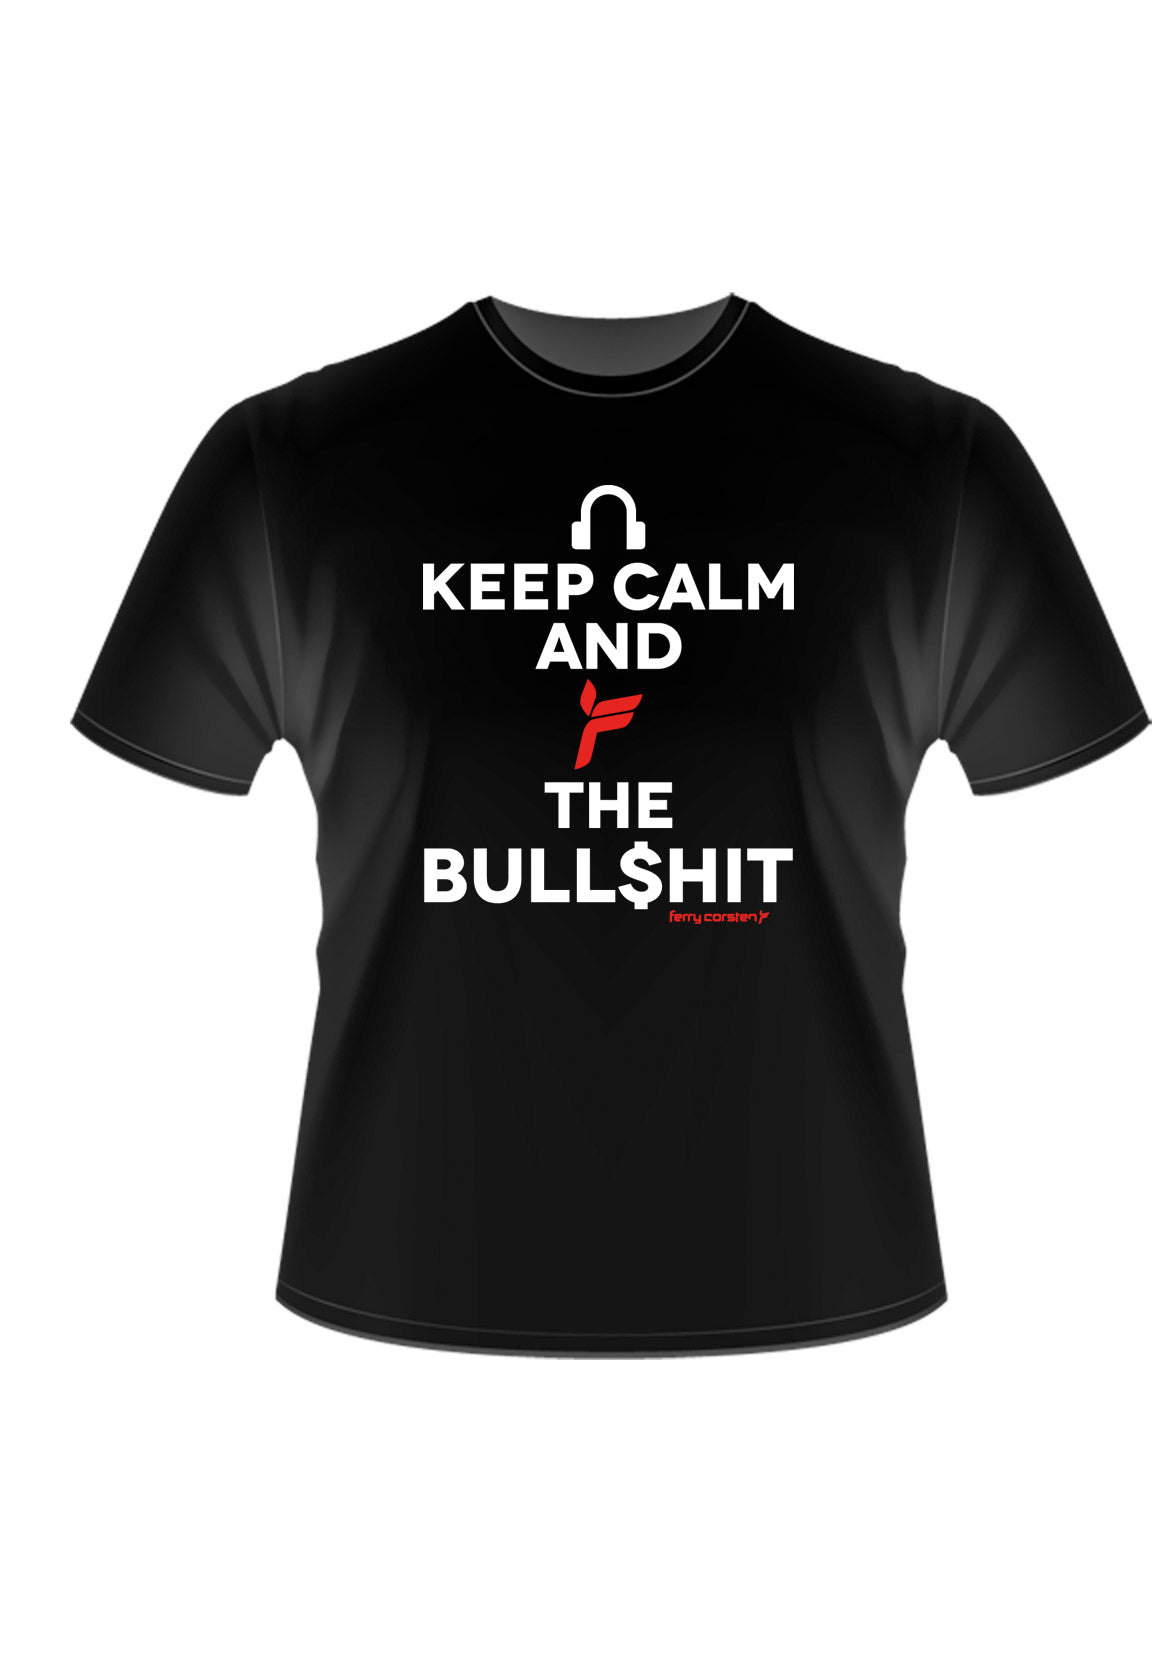 Keep Calm And F The Bull$hit T-shirt